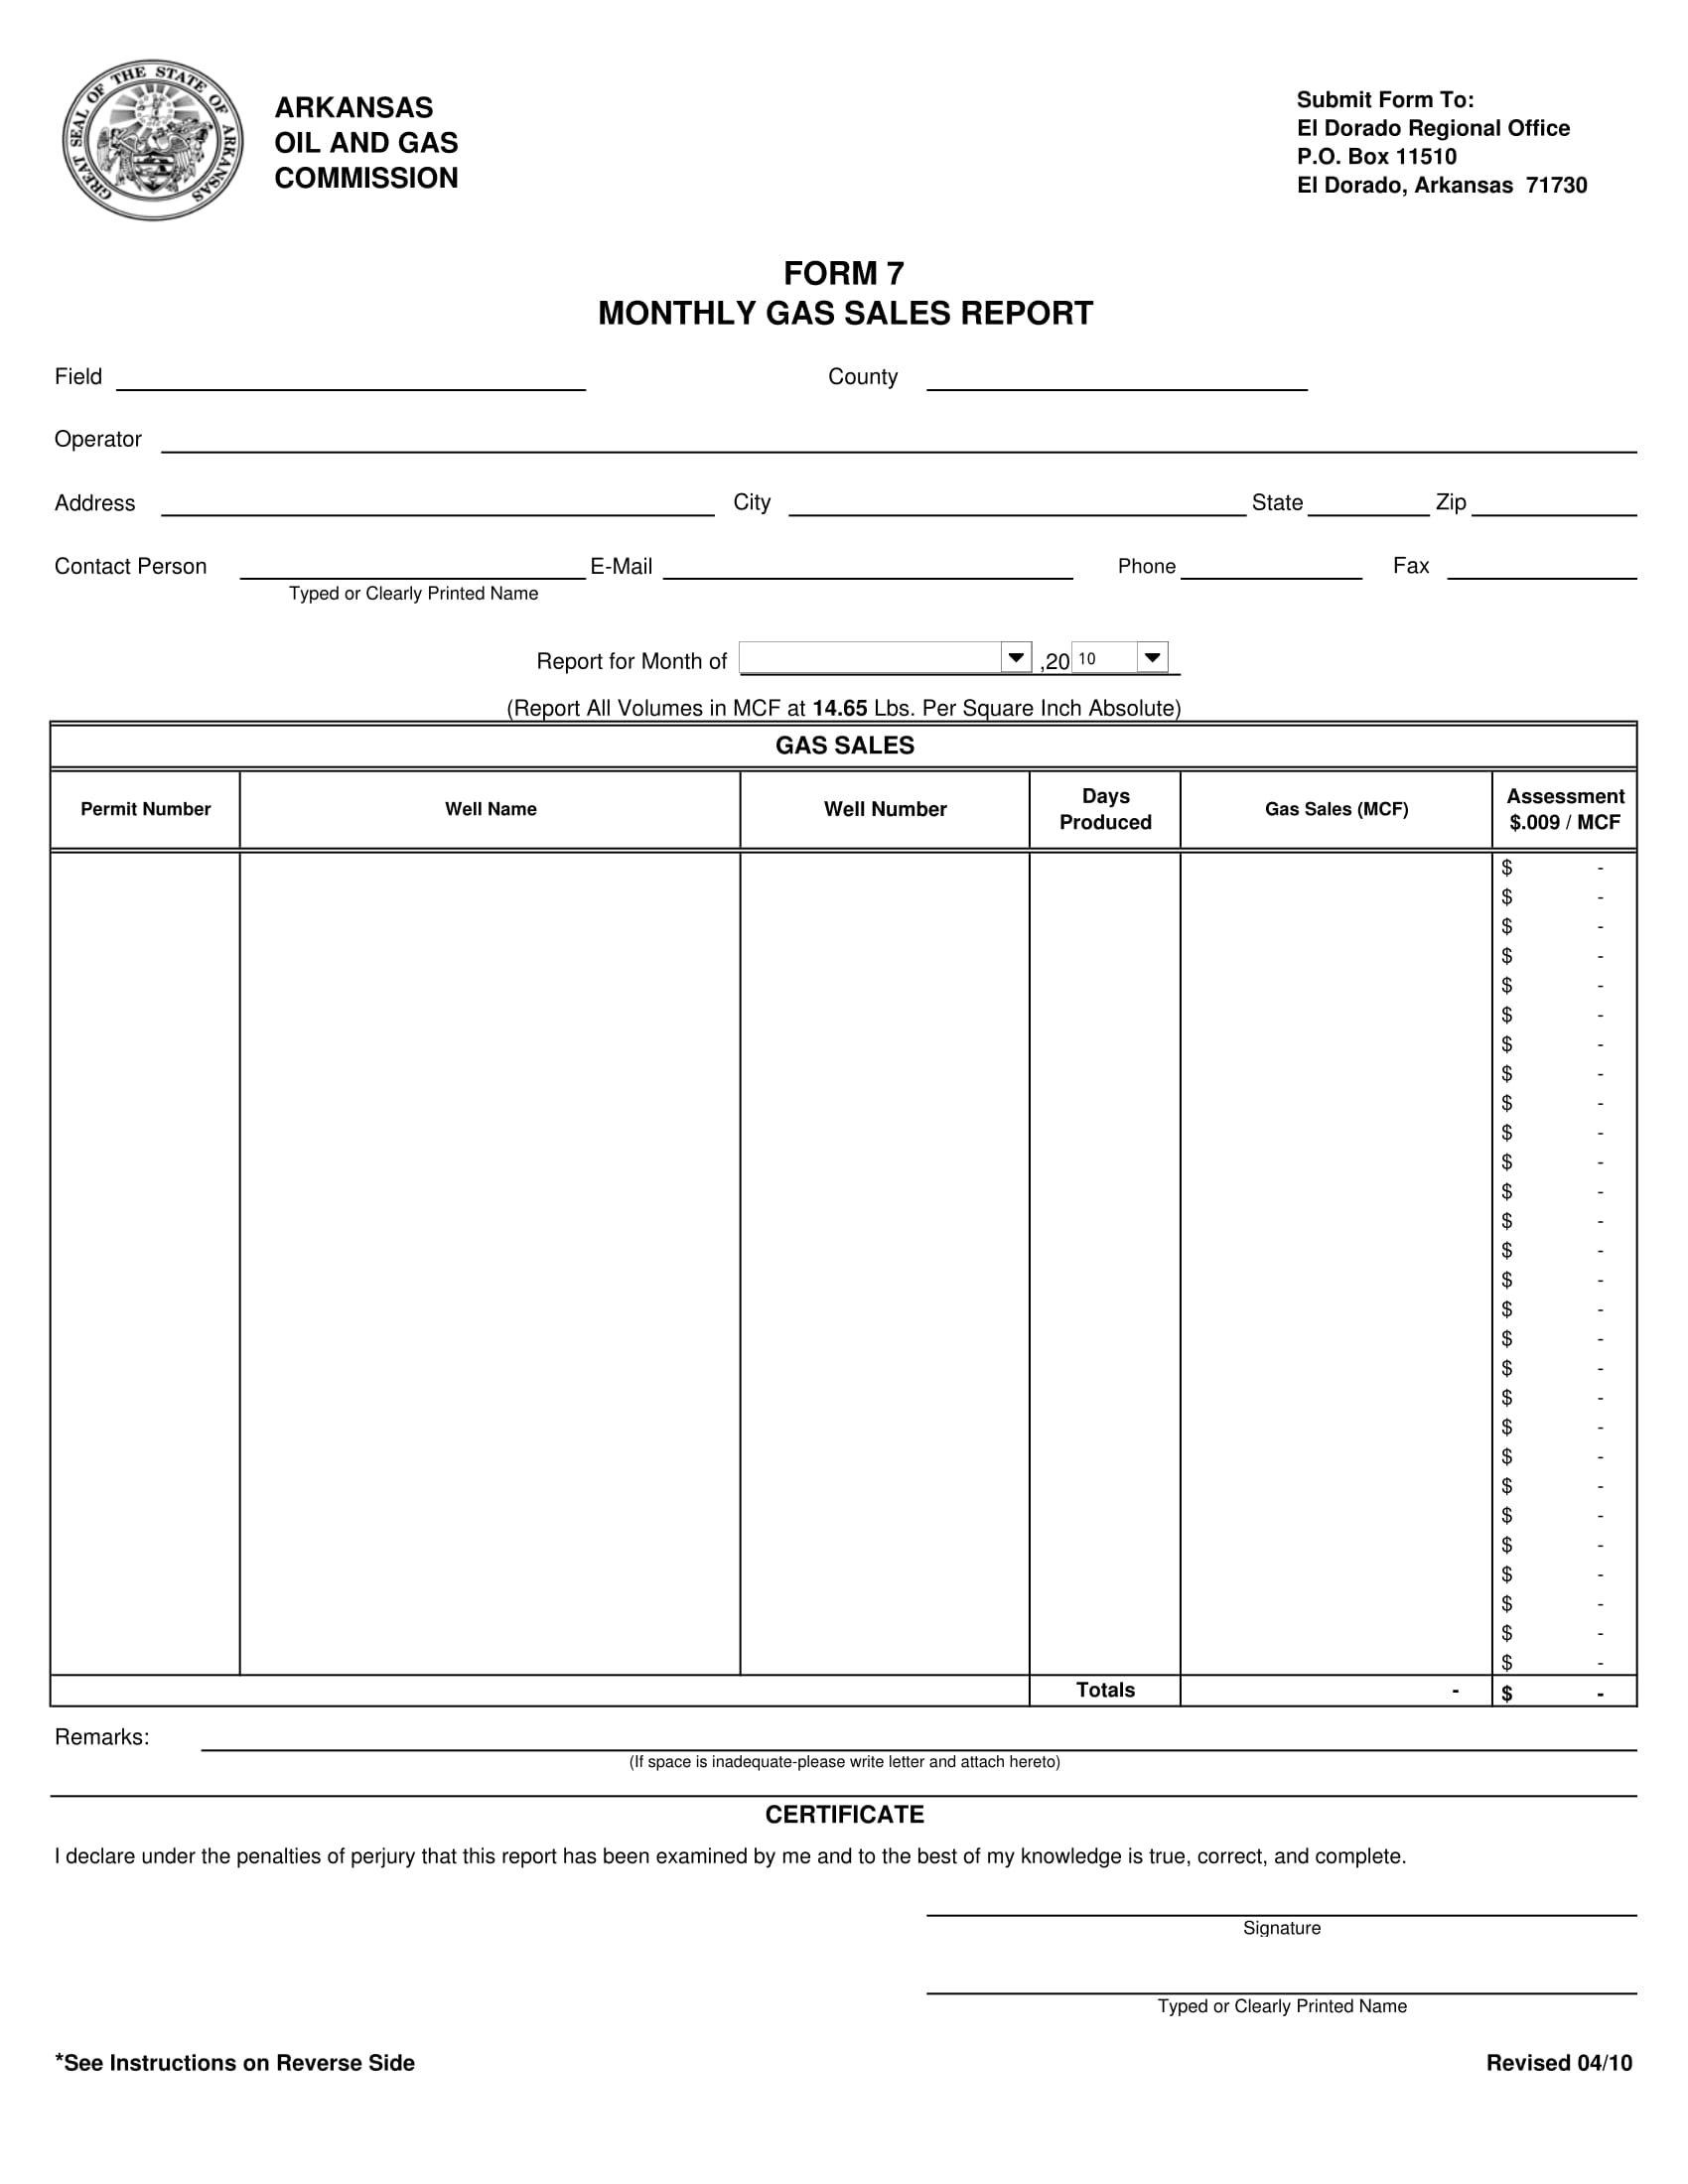 monthly gas sales report form 1